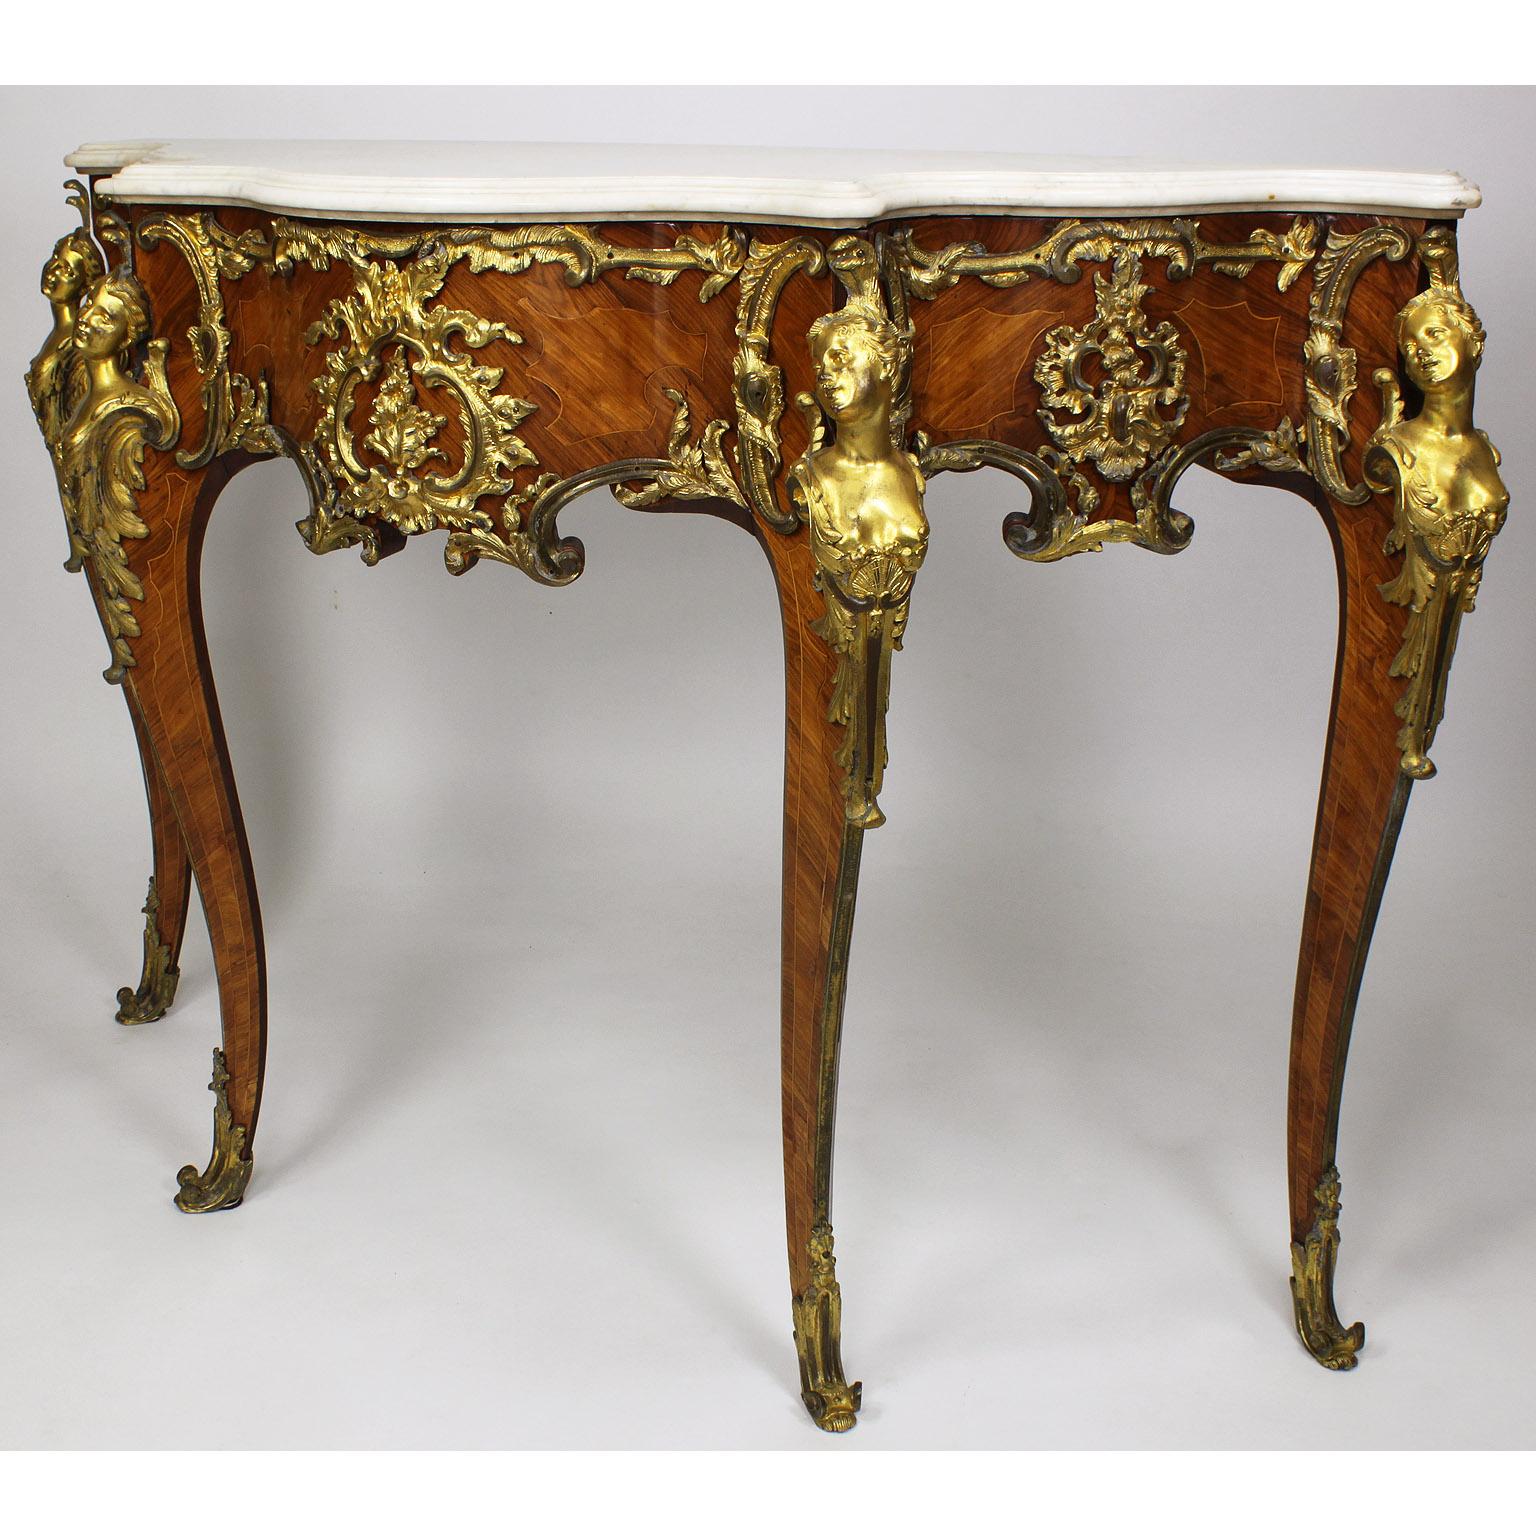 A very fine French 19th century Louis XV style Ormolu-Mounted tulipwood and mahogany console table with marble top, in the manner of Charles Cressent (French, 1685–1768). The serpentine white marble top above a wavy acanthus-mounted gilt-bronze